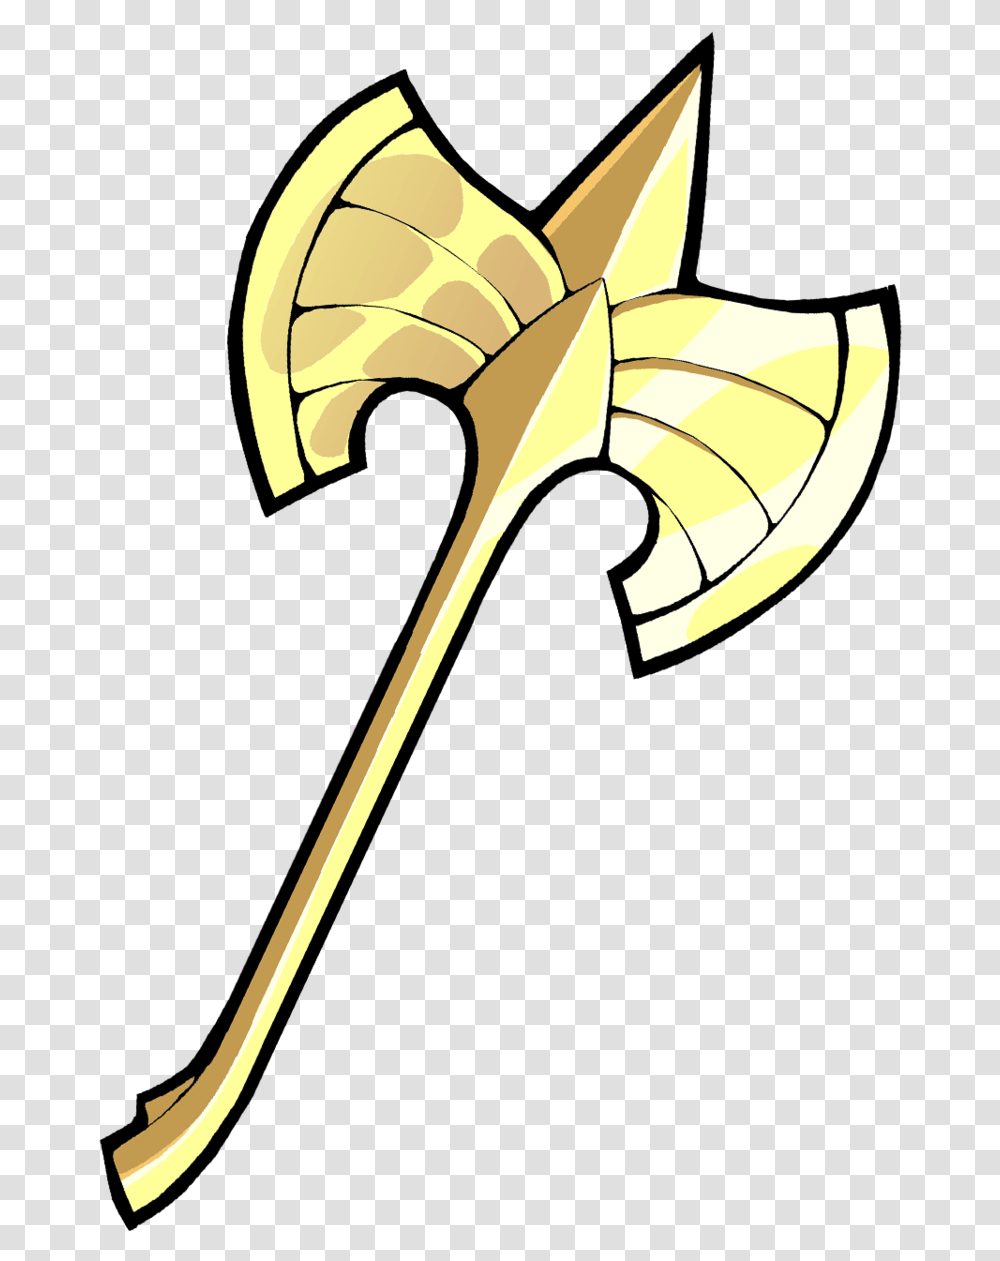 Brawlhalla Goldforged Axe, Tool, Musical Instrument, Hammer, Brass Section Transparent Png